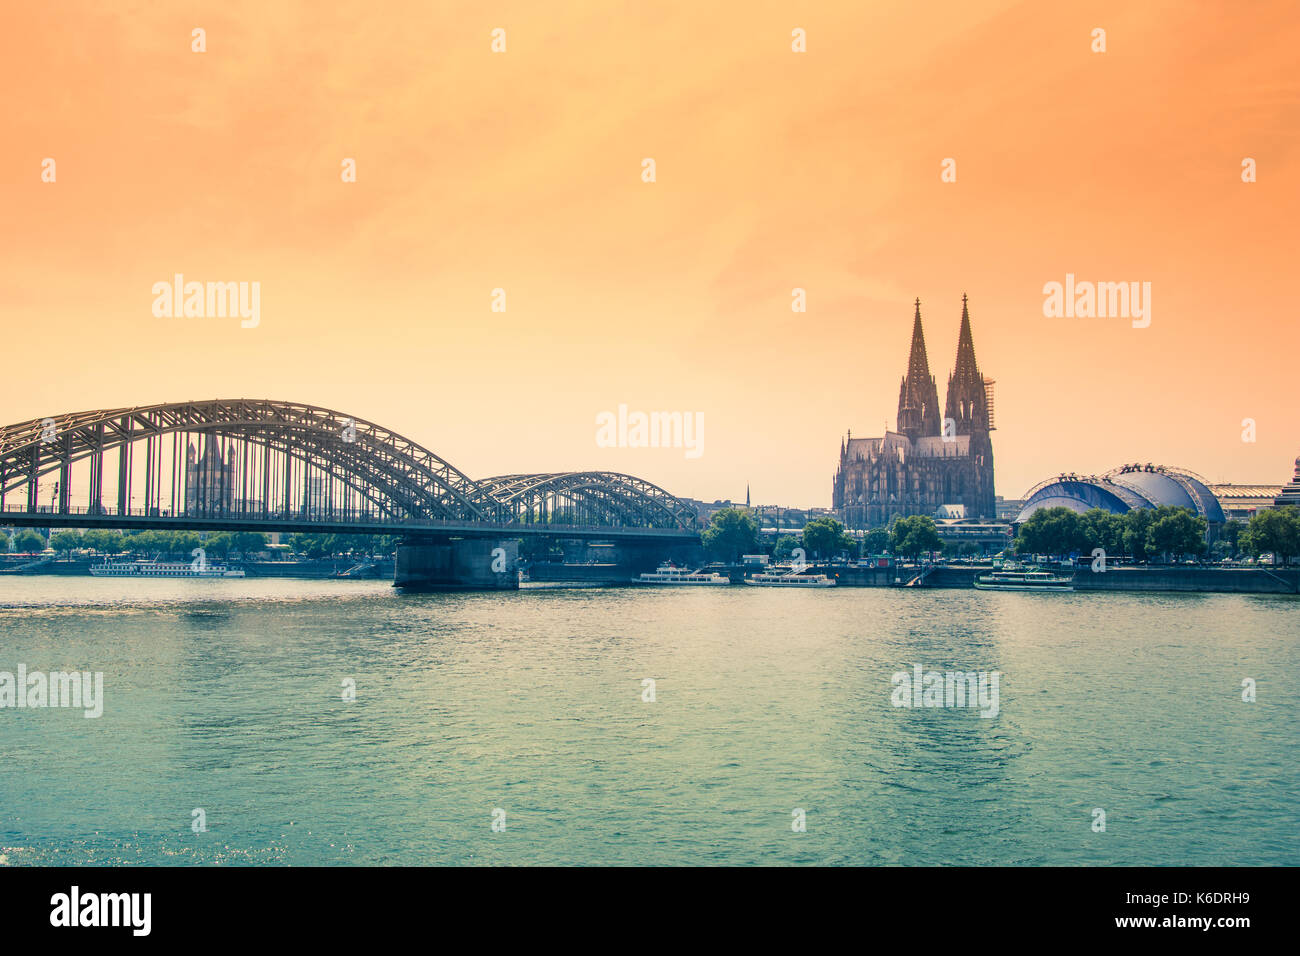 Cologne Cathedral and Hohenzollern Bridge, Cologne, Germany Stock Photo